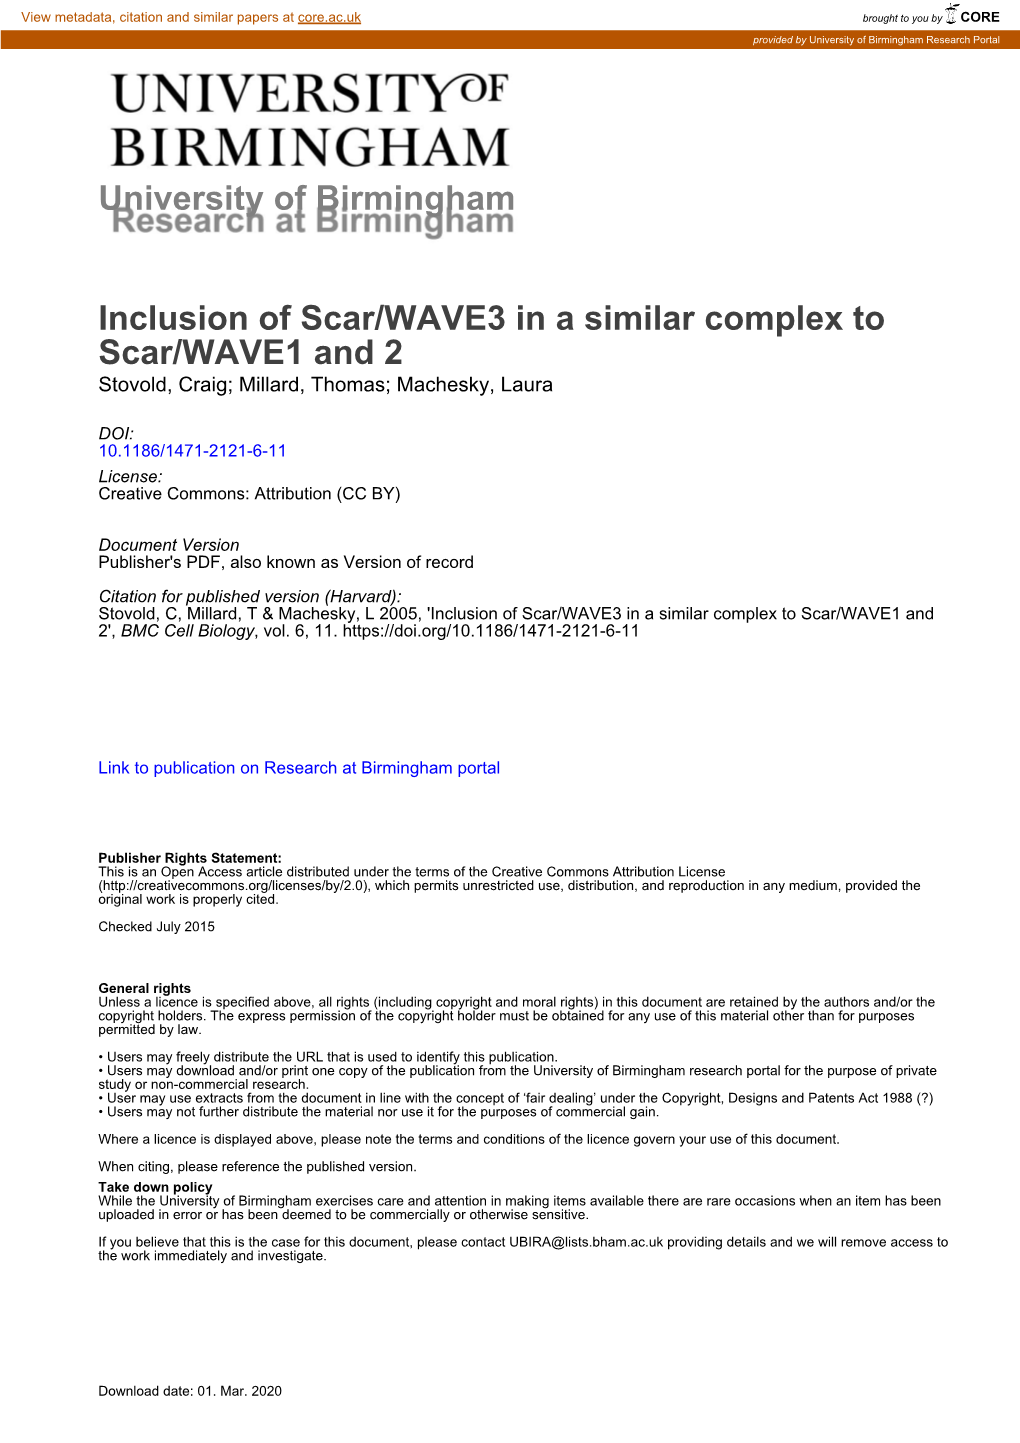 University of Birmingham Inclusion of Scar/WAVE3 in a Similar